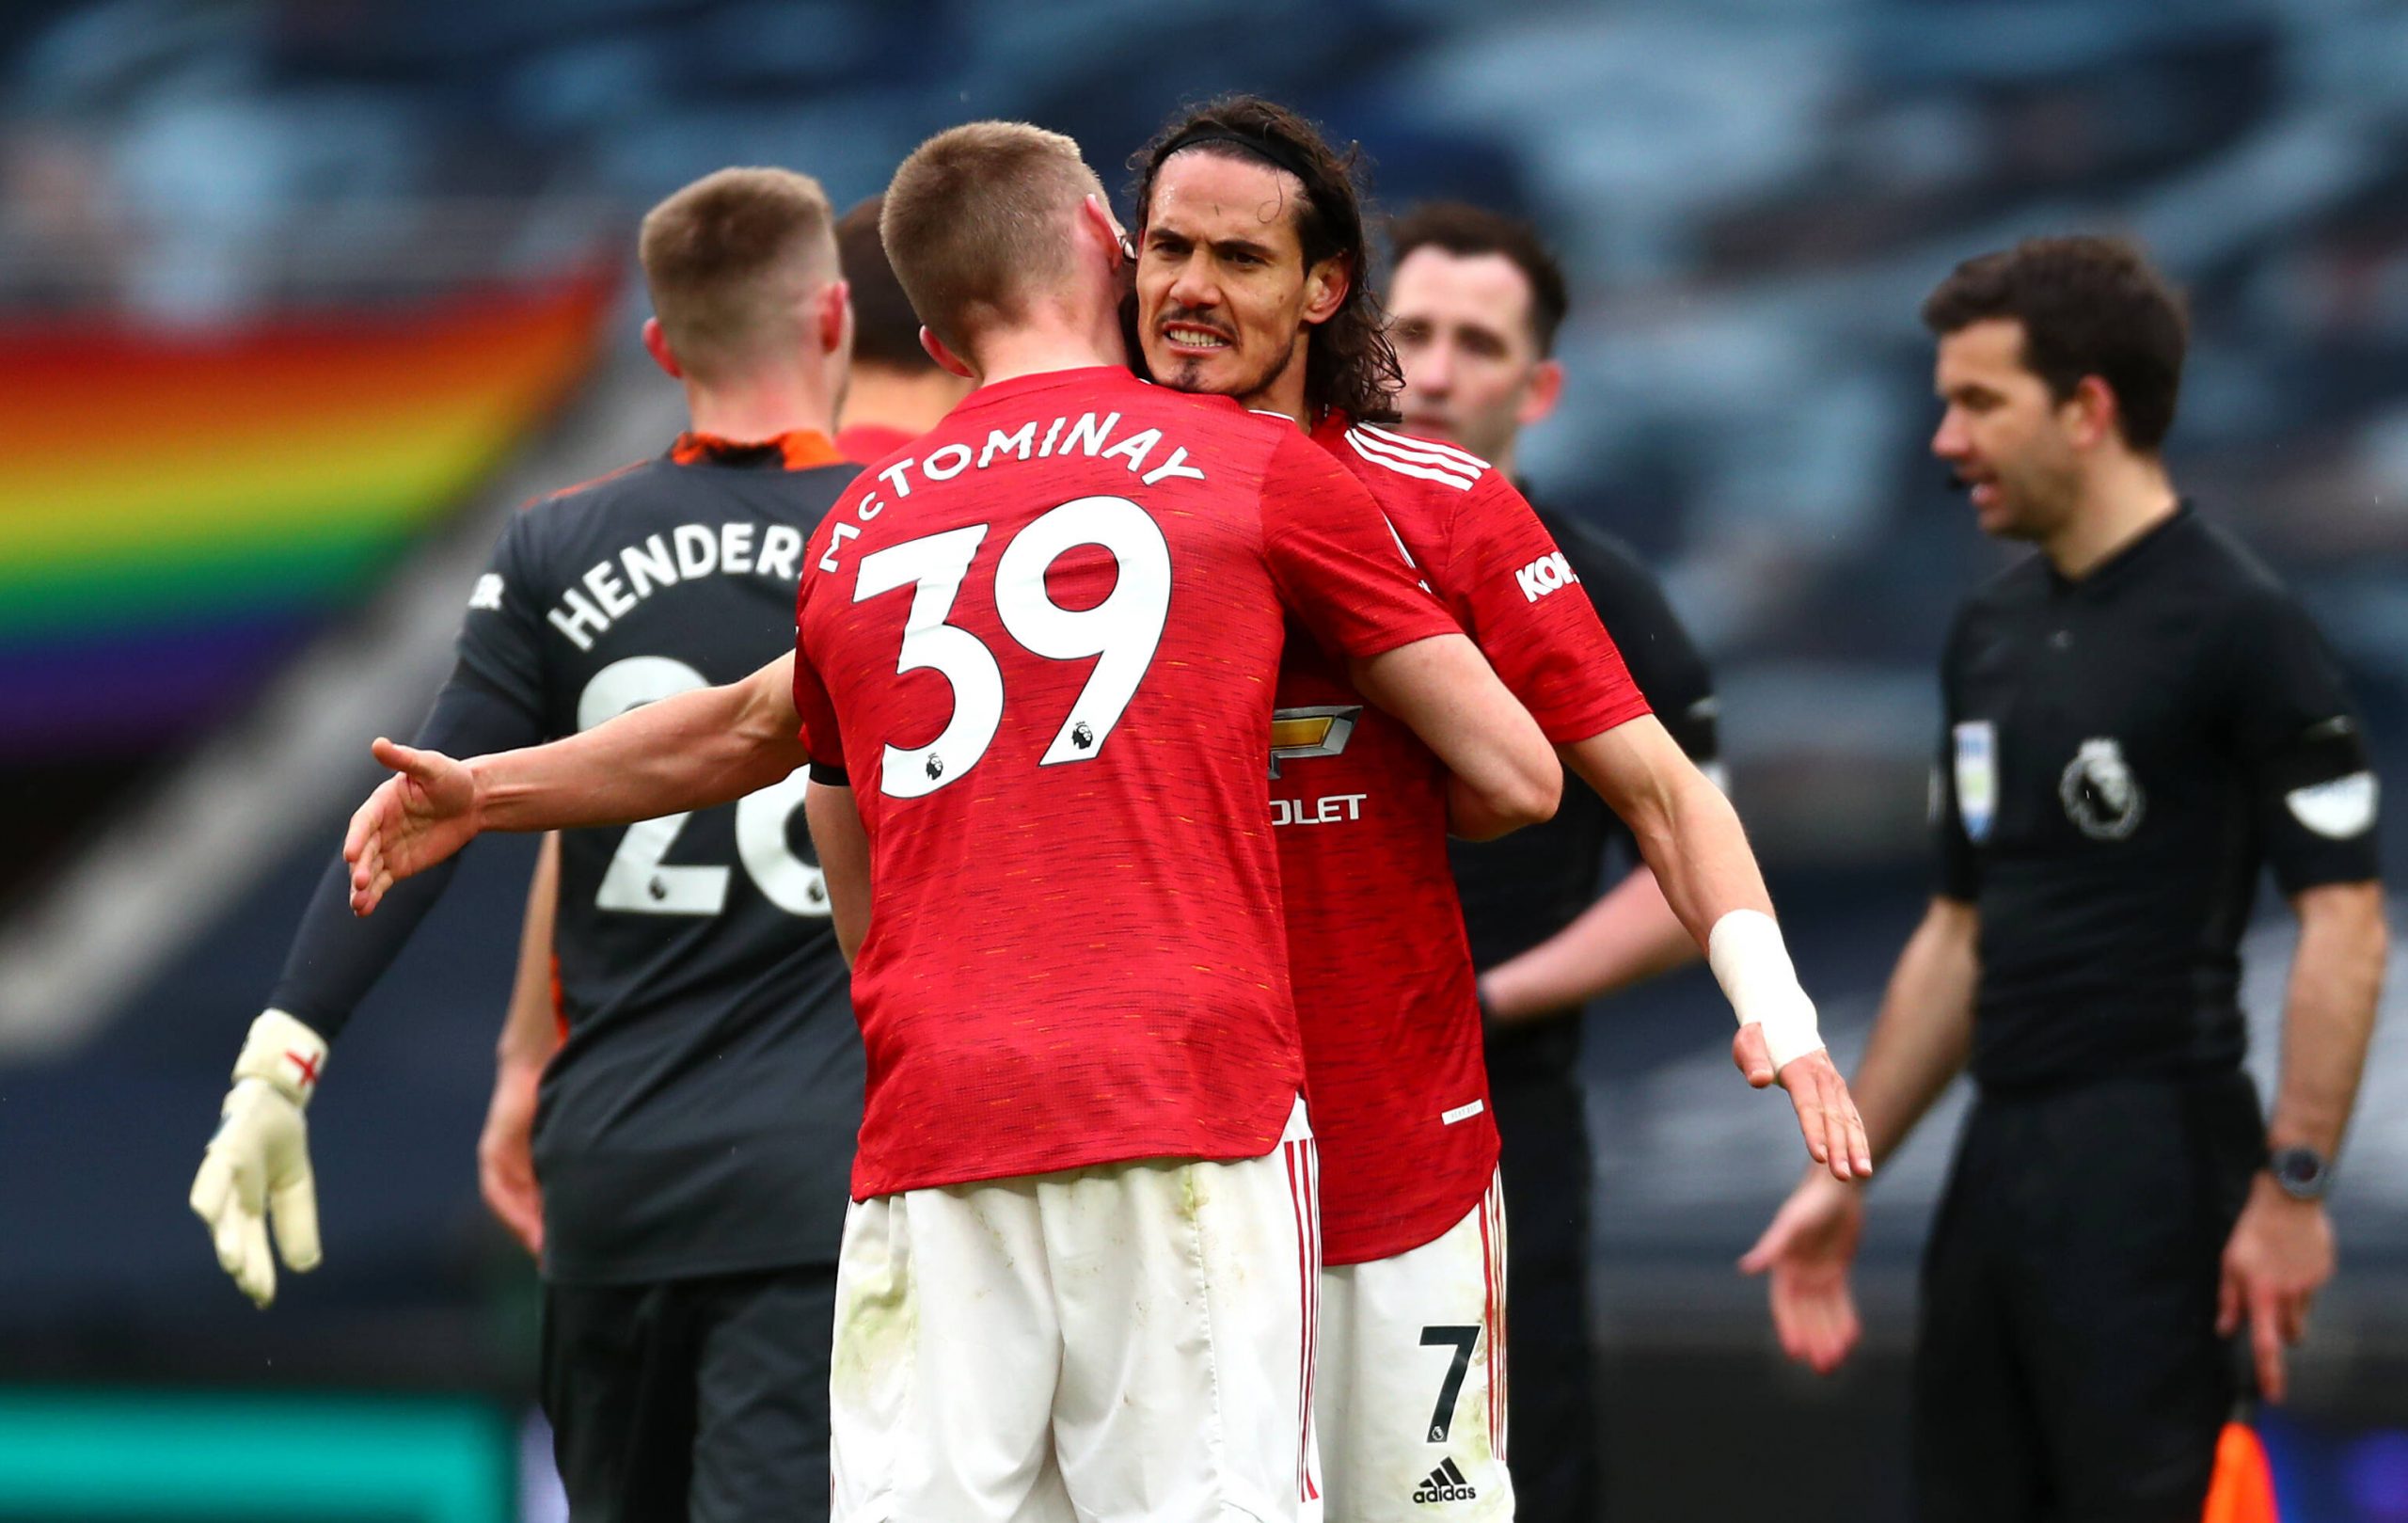 Scott McTominay and Edinson Cavani in action for Manchester United.